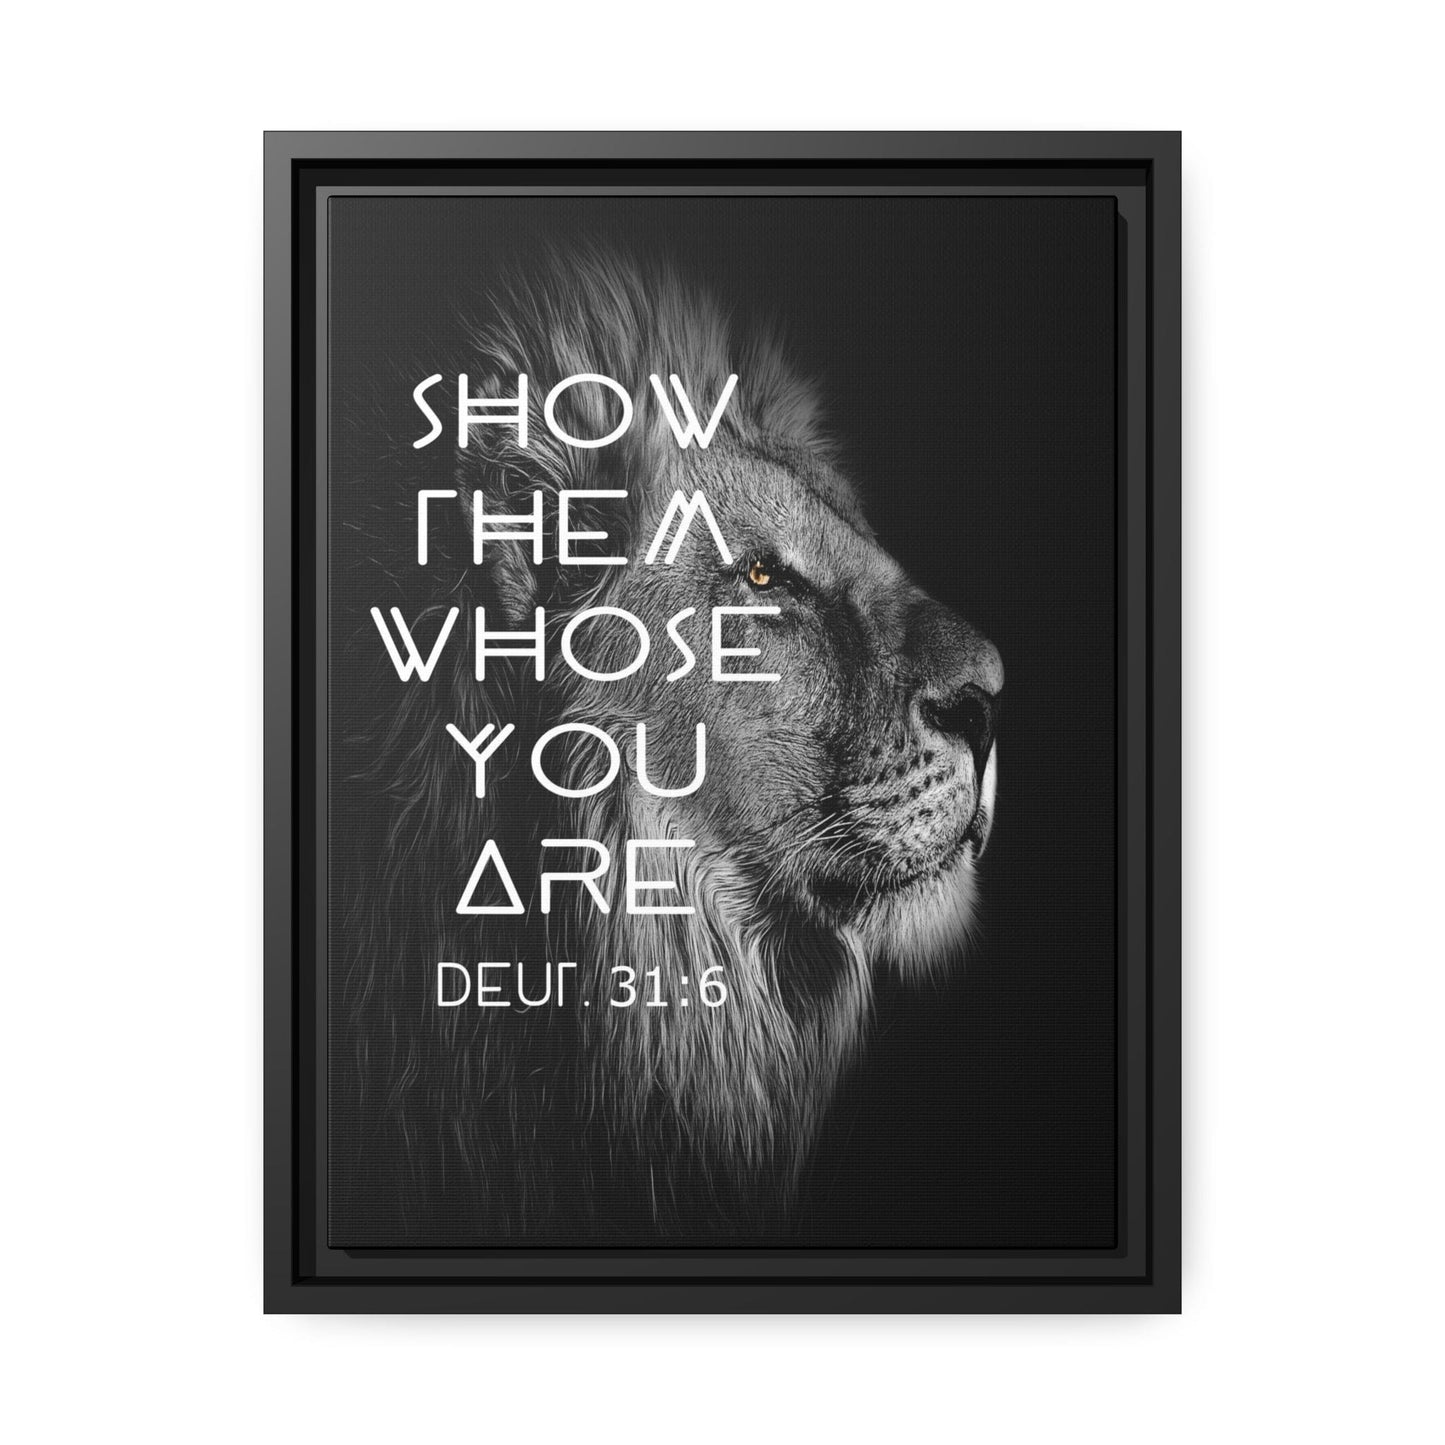 Printify Canvas 12″ x 16″ (Vertical) / Black / 1.25" Show Them Whose You Are - Deuteronomy 31:6 Christian Canvas Wall Art